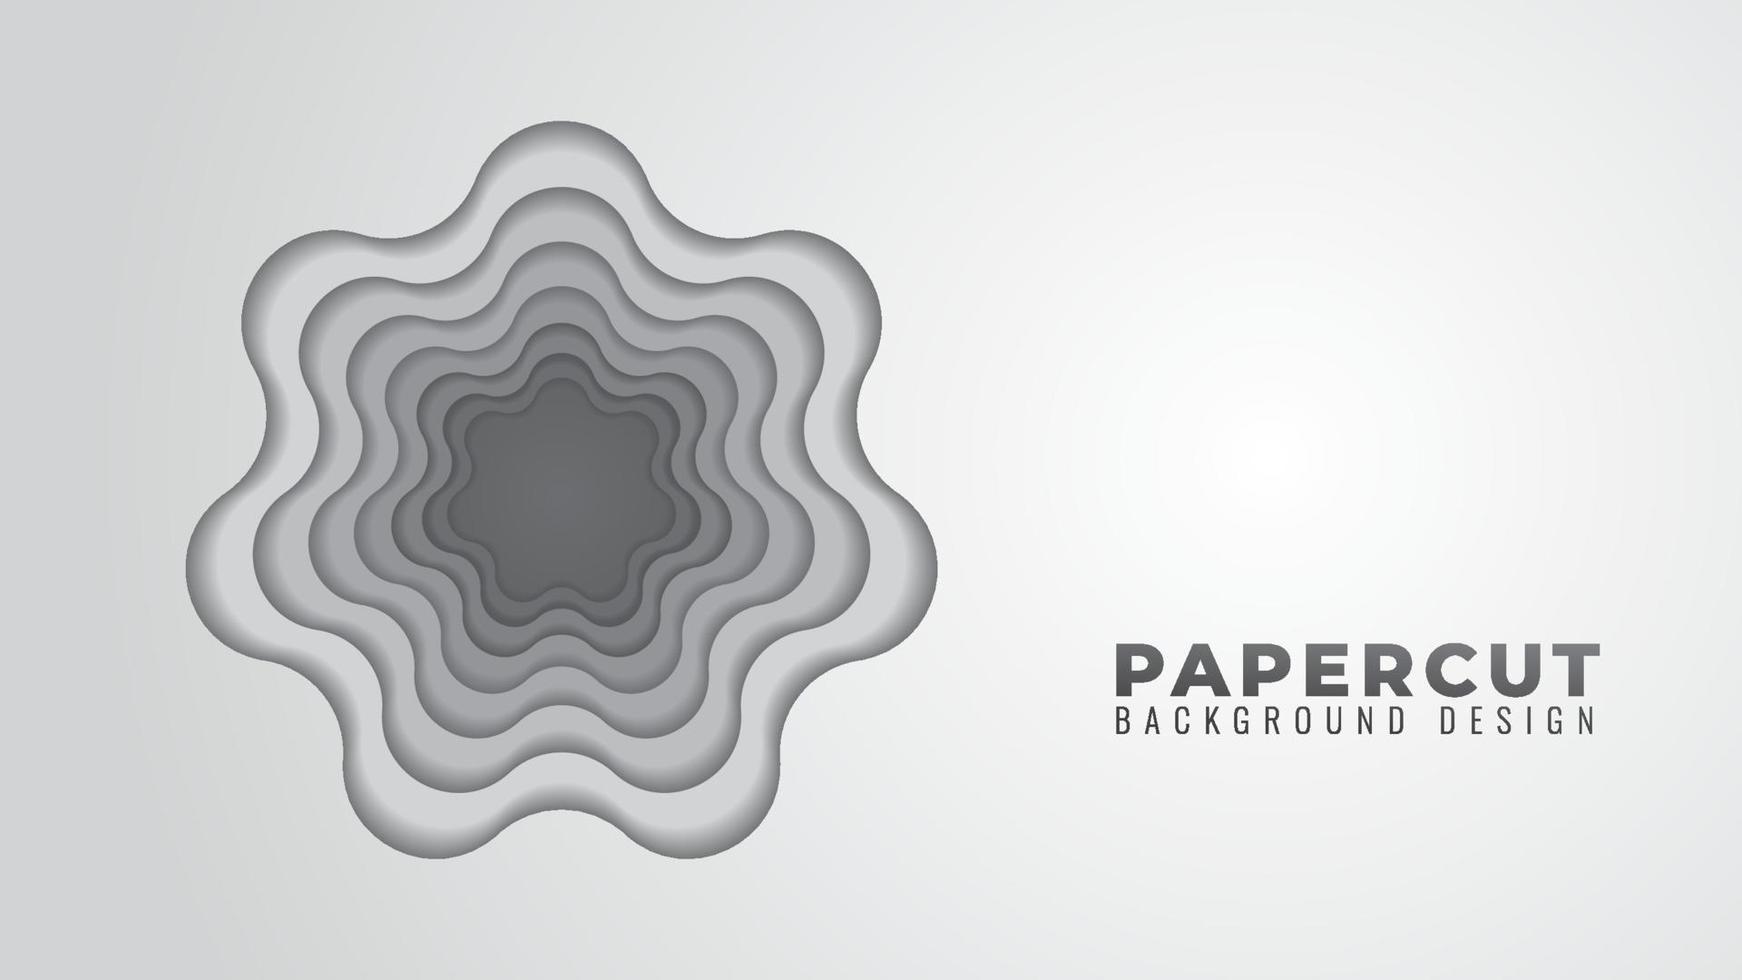 Monochrome Wavy Hole Papercut Layers Vector Illustration. Abstract Background Design Template. Gray Gradient Color Theme.